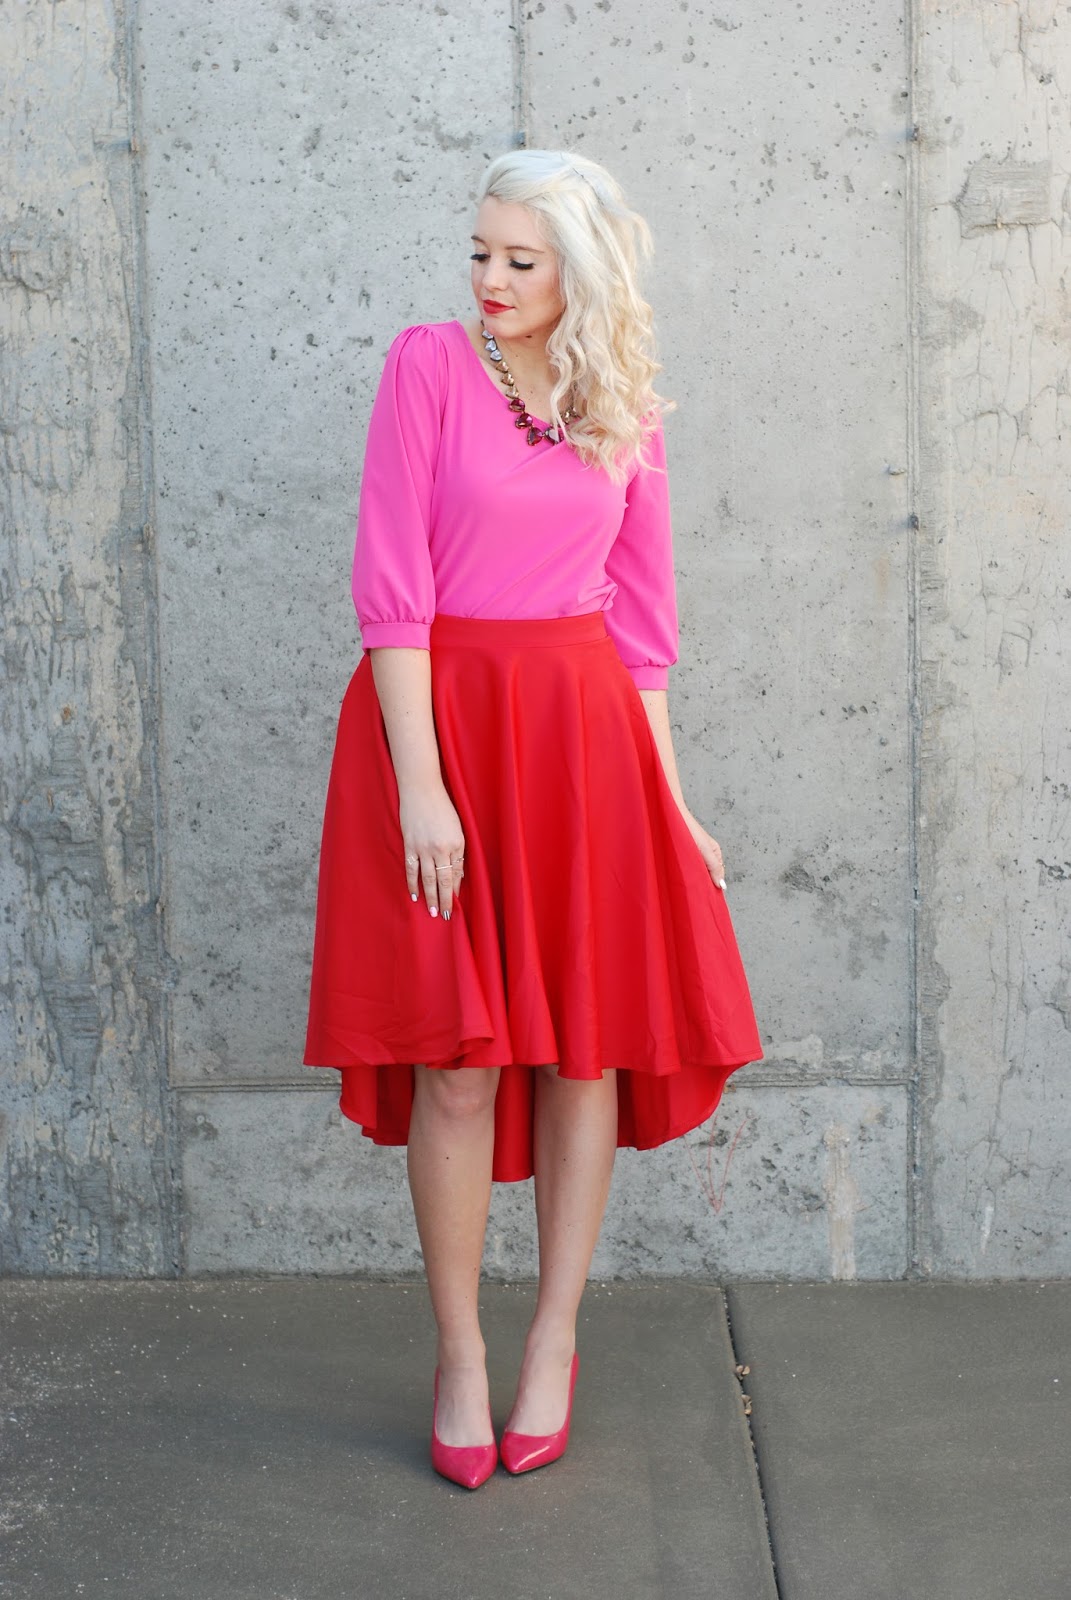 Valentine Outfit - Red And Pink  The Red Closet Diary-7443